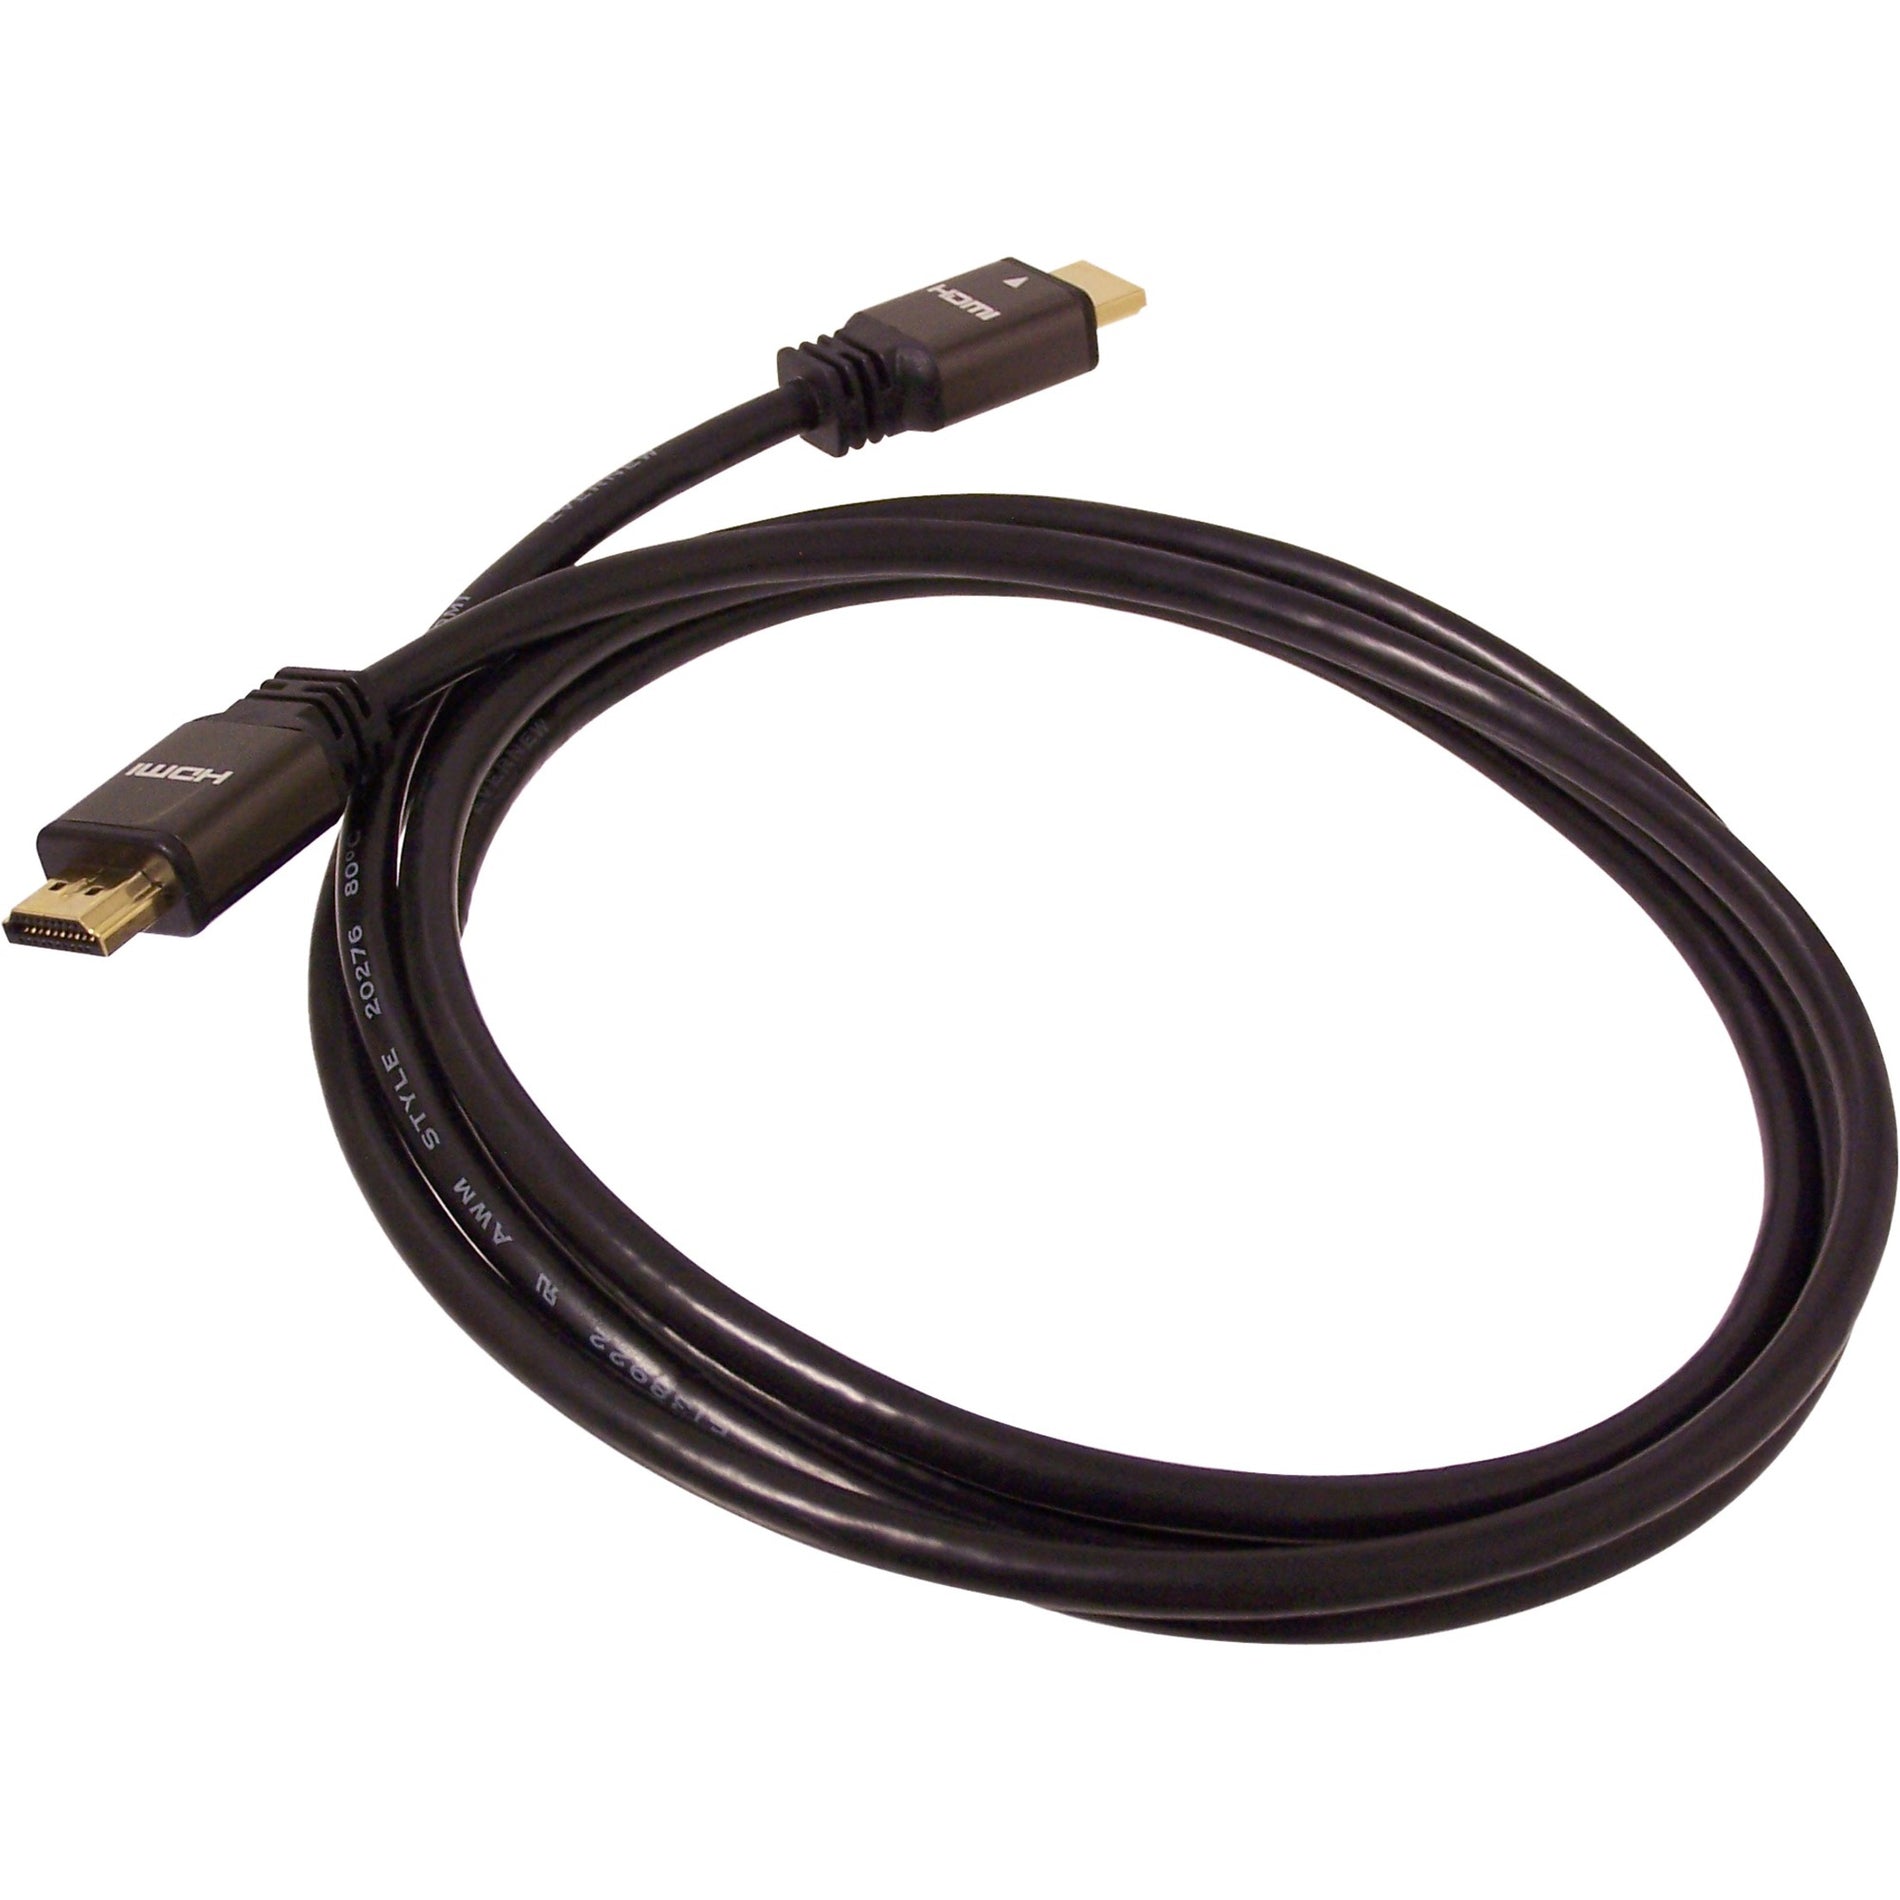 SIIG CB-000012-S1 HDMI Cable, 6.56 ft, Molded, Copper Conductor, Shielded, Gold Plated Connectors